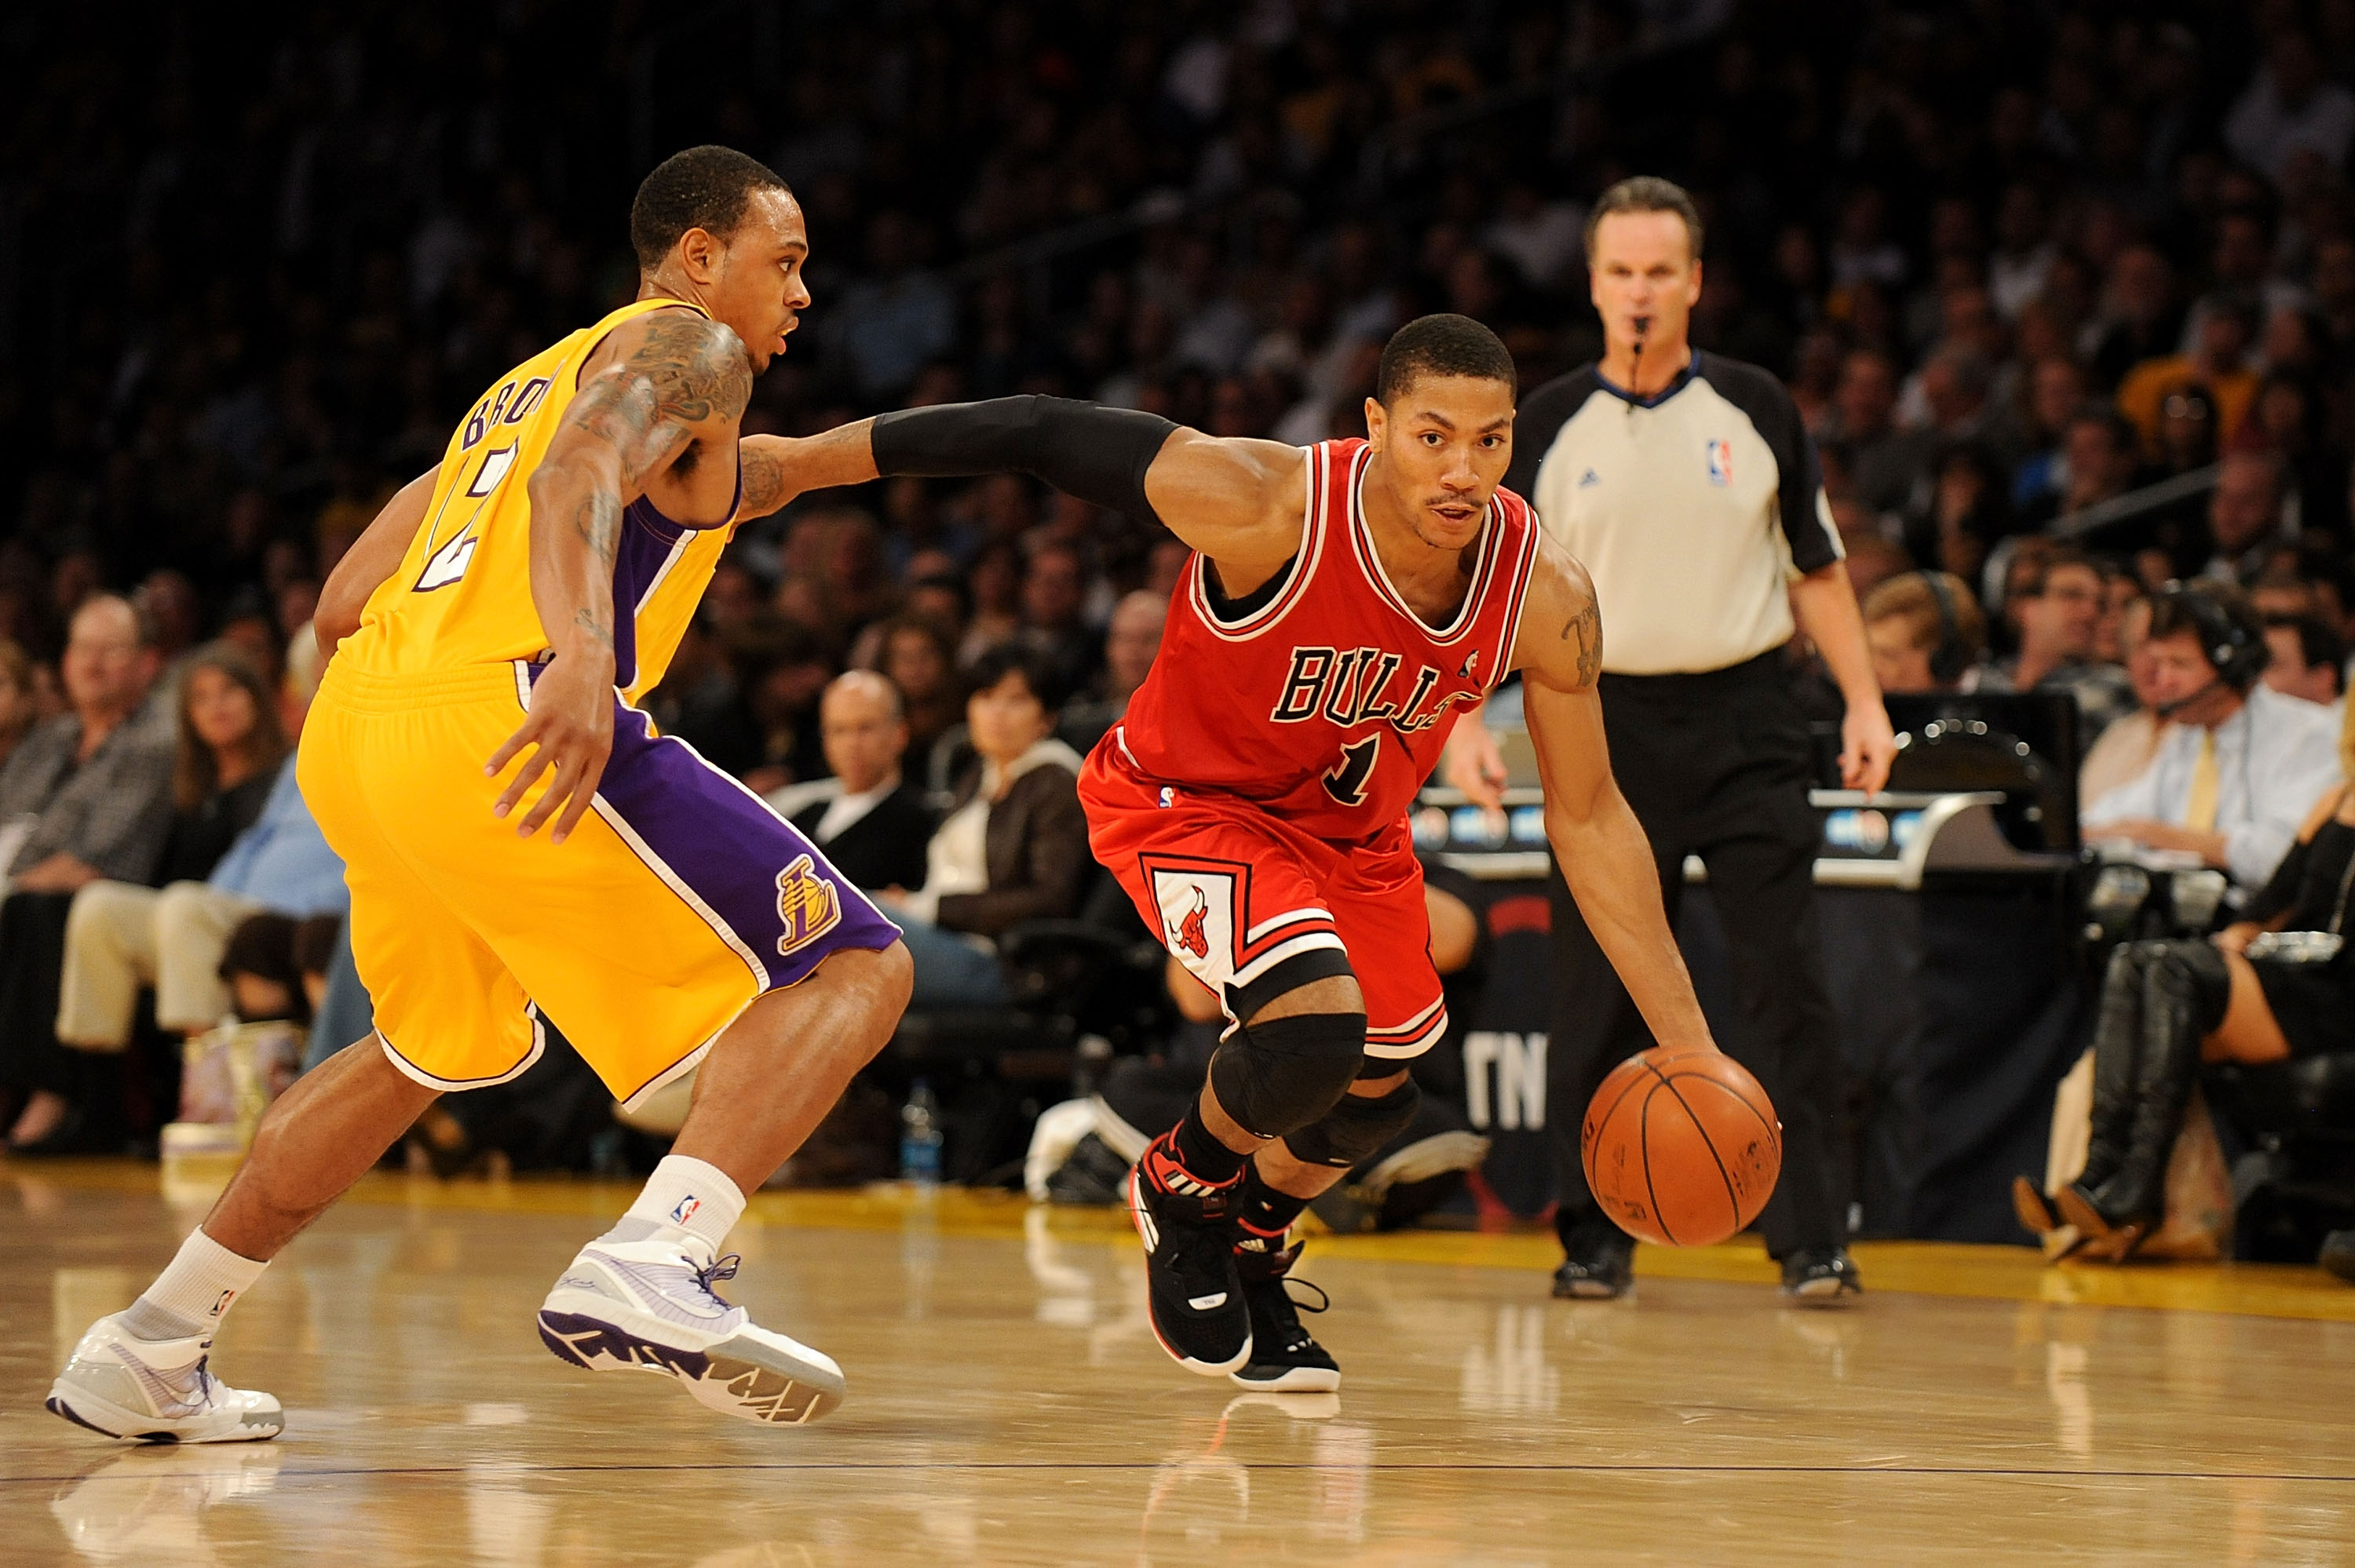 LOS ANGELES, CA - NOVEMBER 19:  Derrick Rose #1 of the Chicago Bulls drives against Shannon Brown #12 of the Los Angeles Lakers during the game on November 19, 2009 at Staples Center in Los Angeles, California.  The Lakers won 108-93.  NOTE TO USER: User 